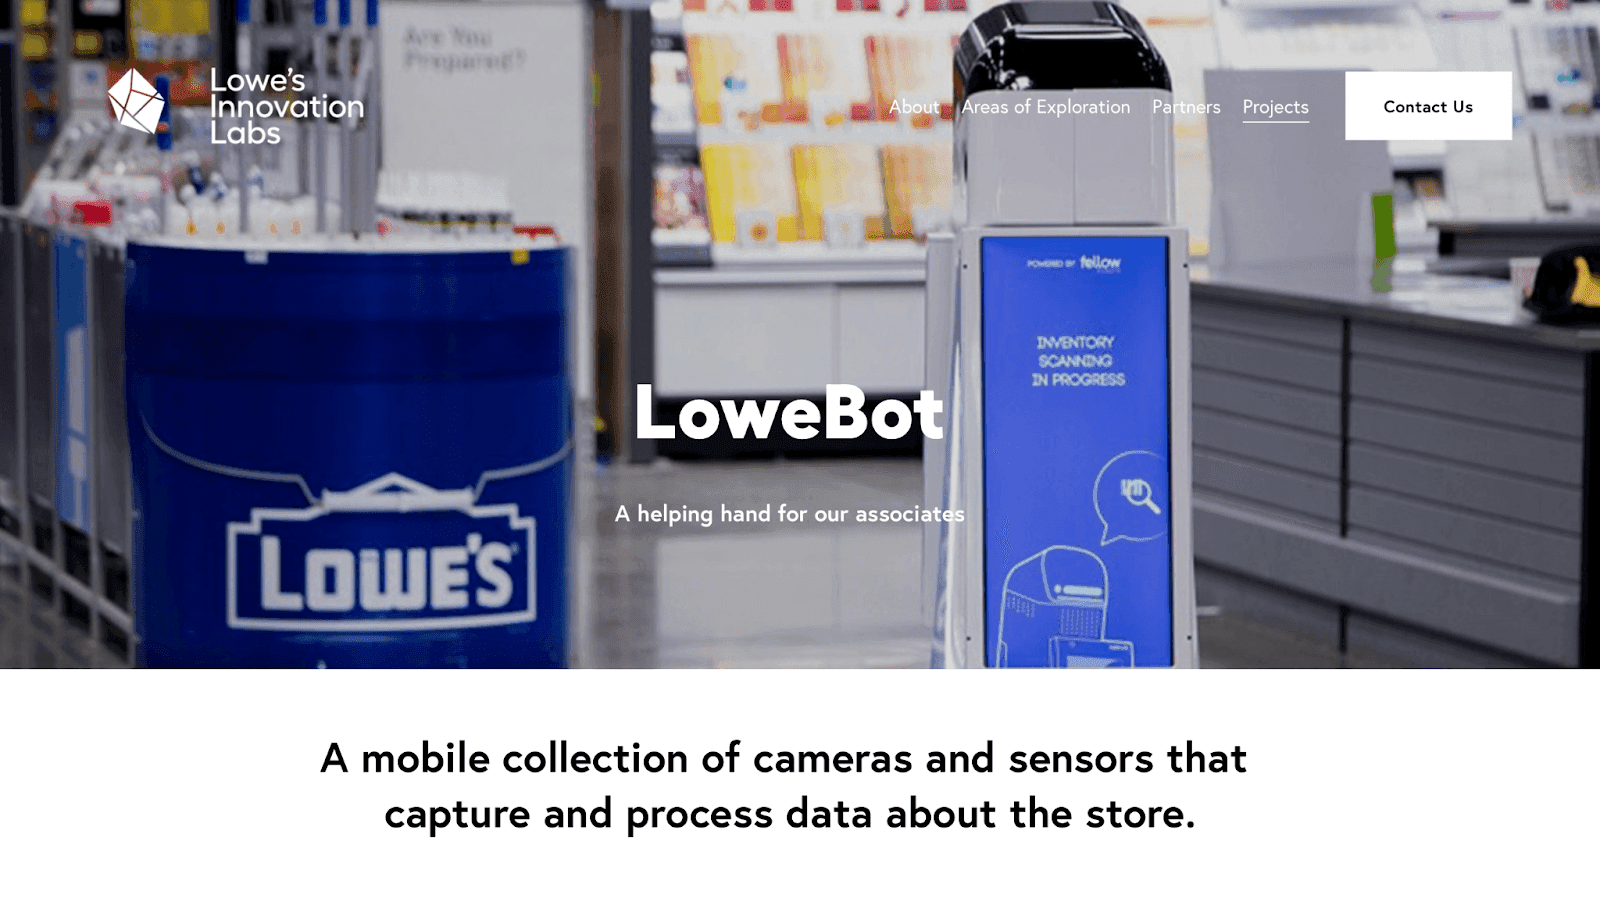 LoweBot is equipped with cameras and sensors to assist in-store customers find what they're looking for